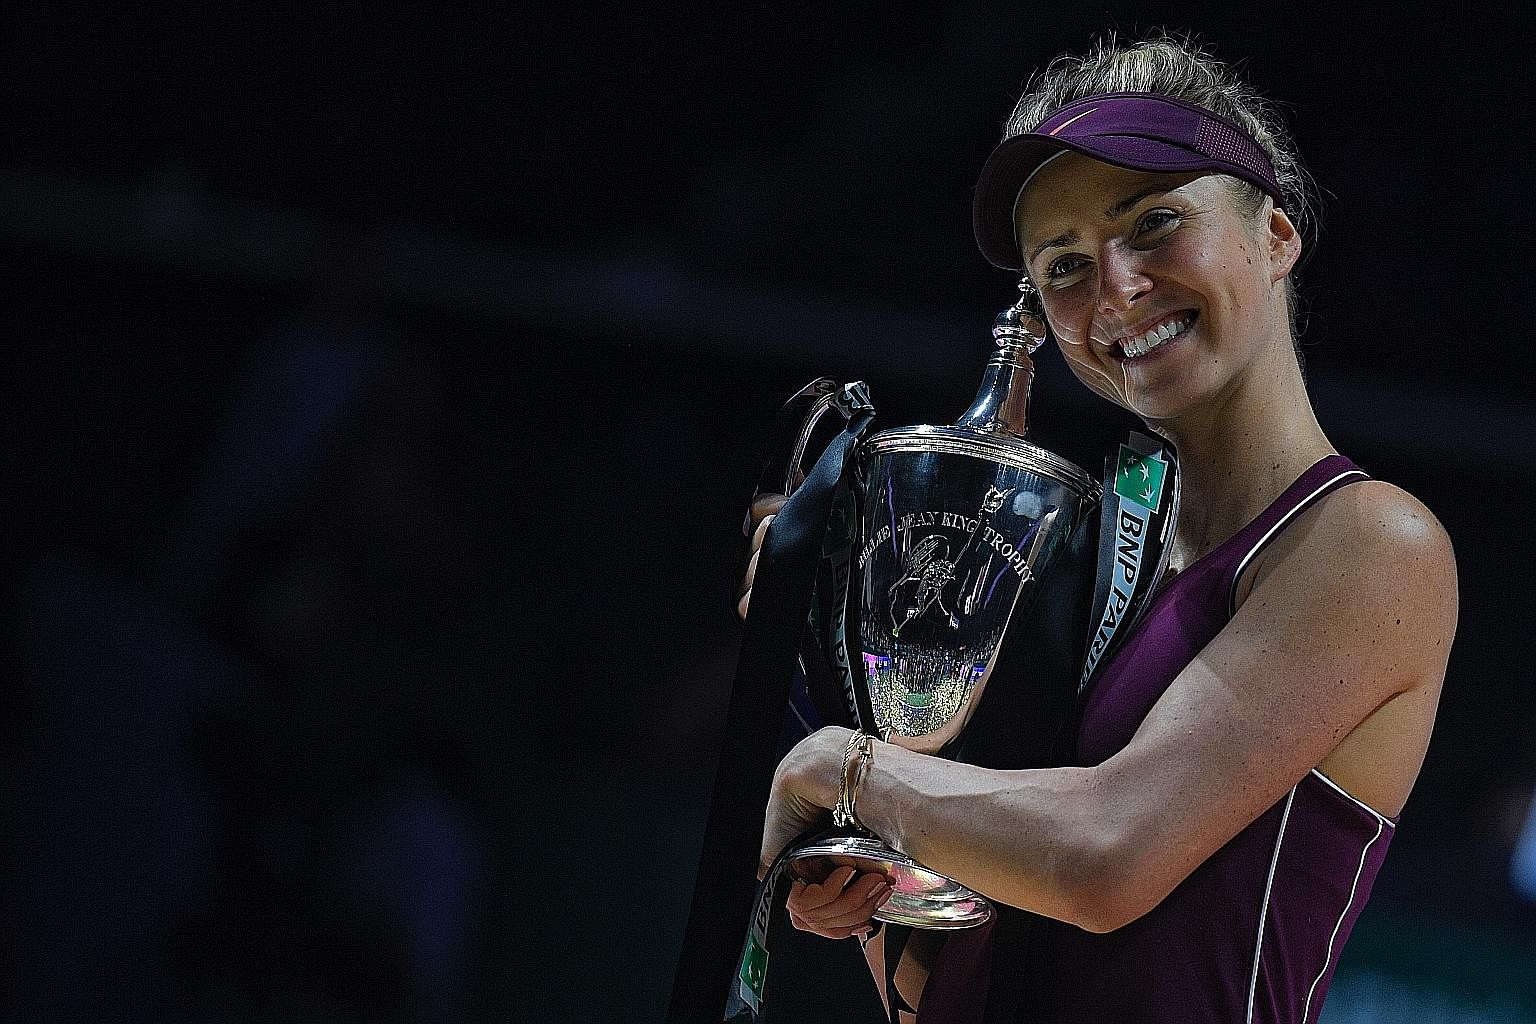 Elina Svitolina of Ukraine clinched the biggest title of her tennis career yesterday when she defeated American Sloane Stephens 3-6, 6-2, 6-2 at the Indoor Stadium to win the BNP Paribas WTA Finals Singapore presented by SC Global. After a five-year 